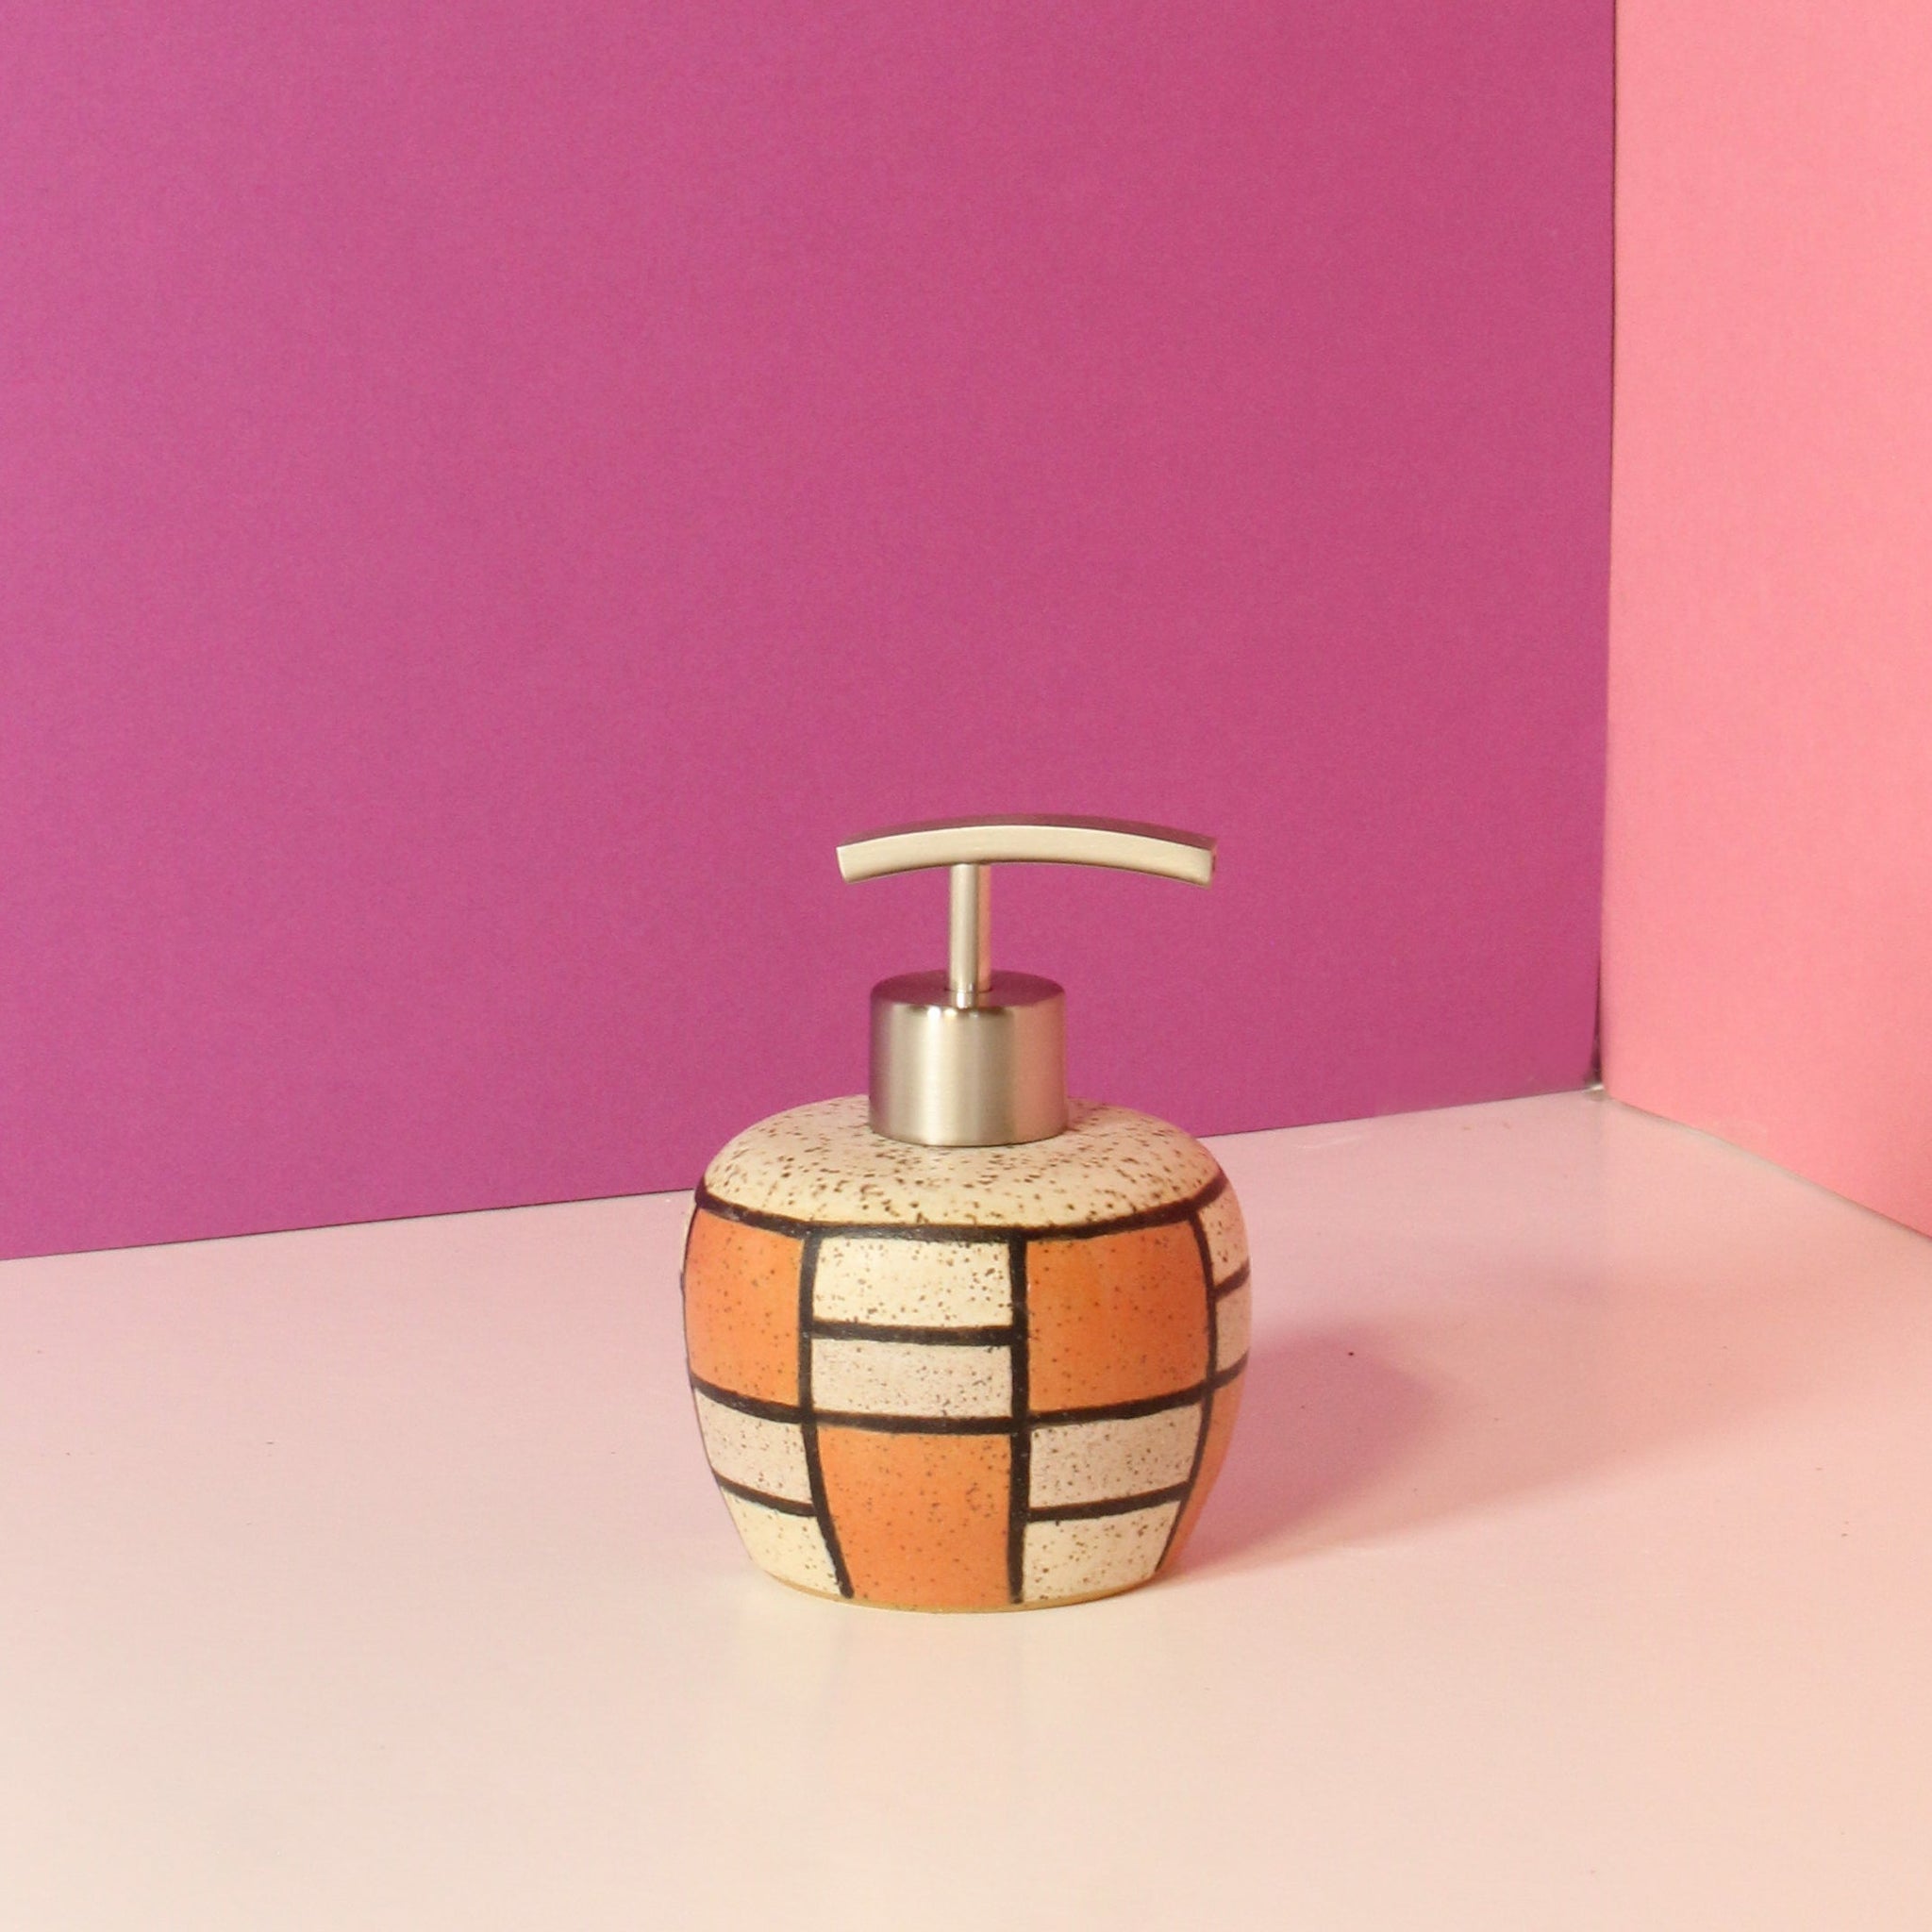 Made-to-Order Glazed Stoneware Soap Dispenser with Brick Pattern